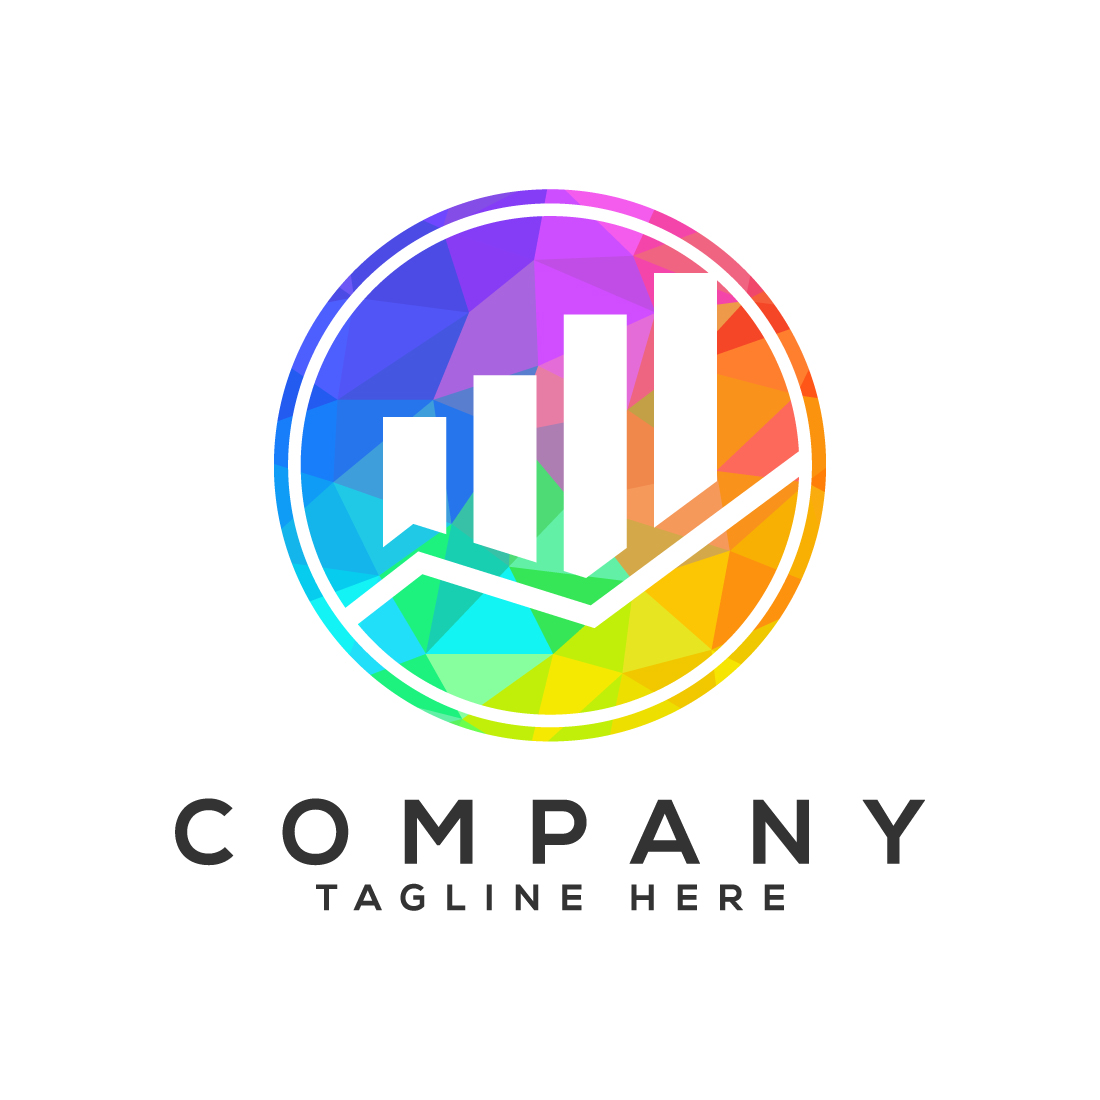 Finance and accounting logo low poly art style design vector template, Polygonal business finance logo preview image.